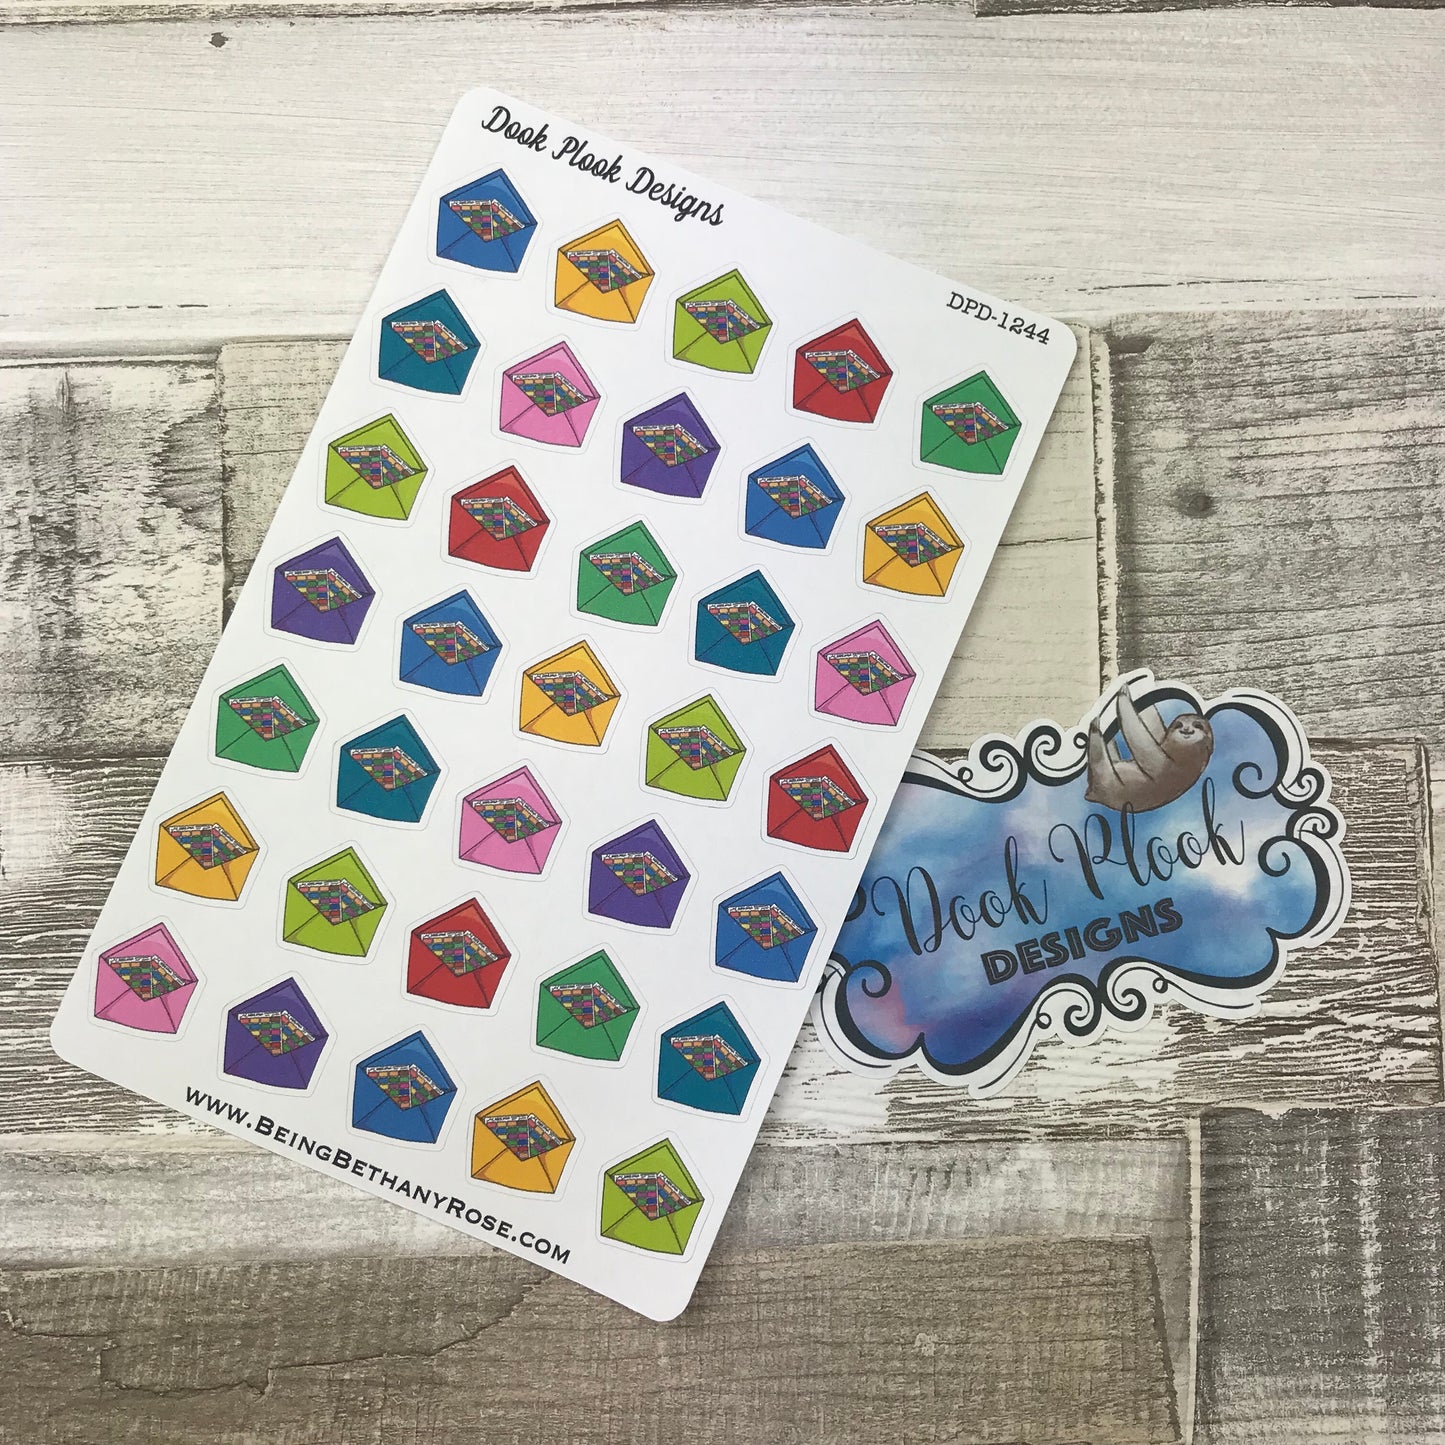 Happy Mail / envelope / sticker delivery stickers (DPD1244)